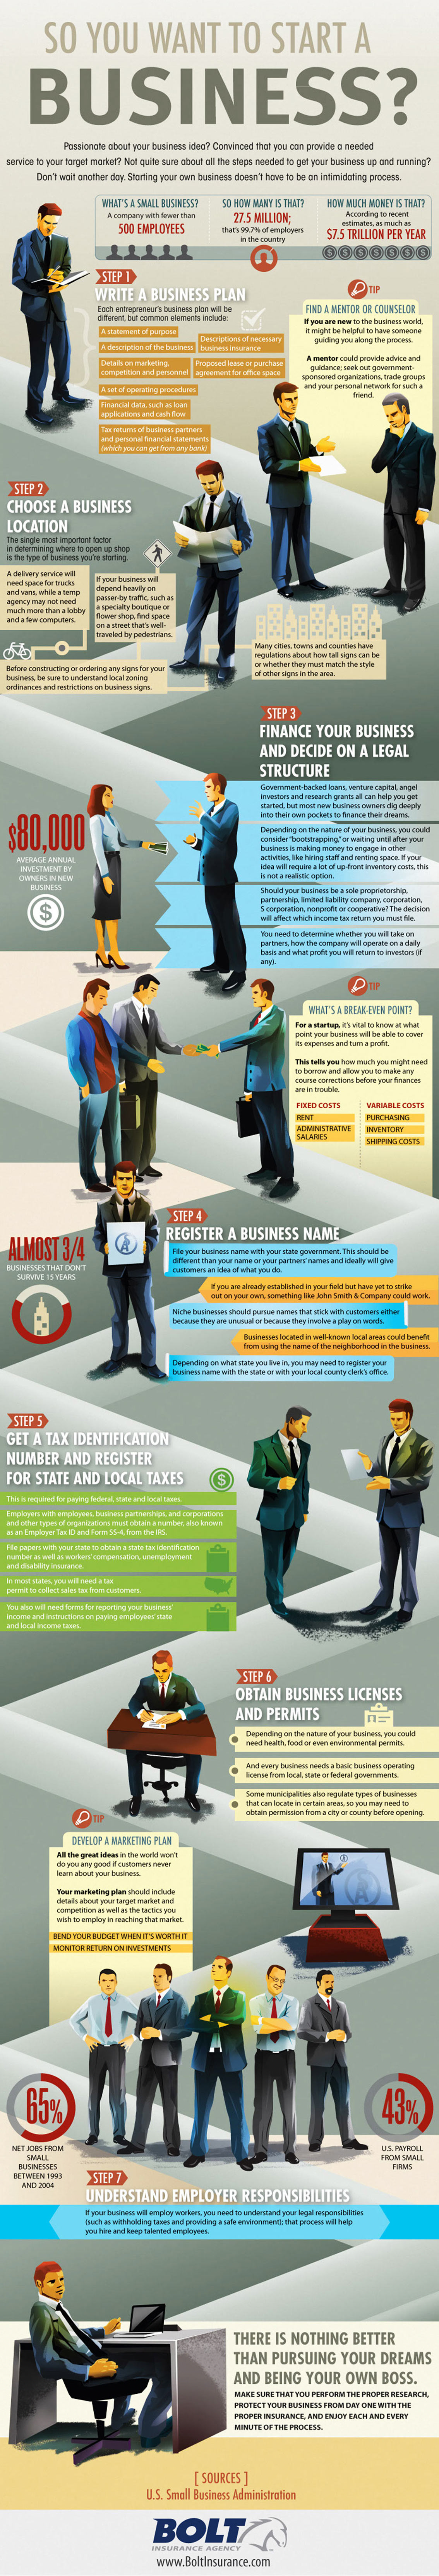 How to Start a Business Infographic